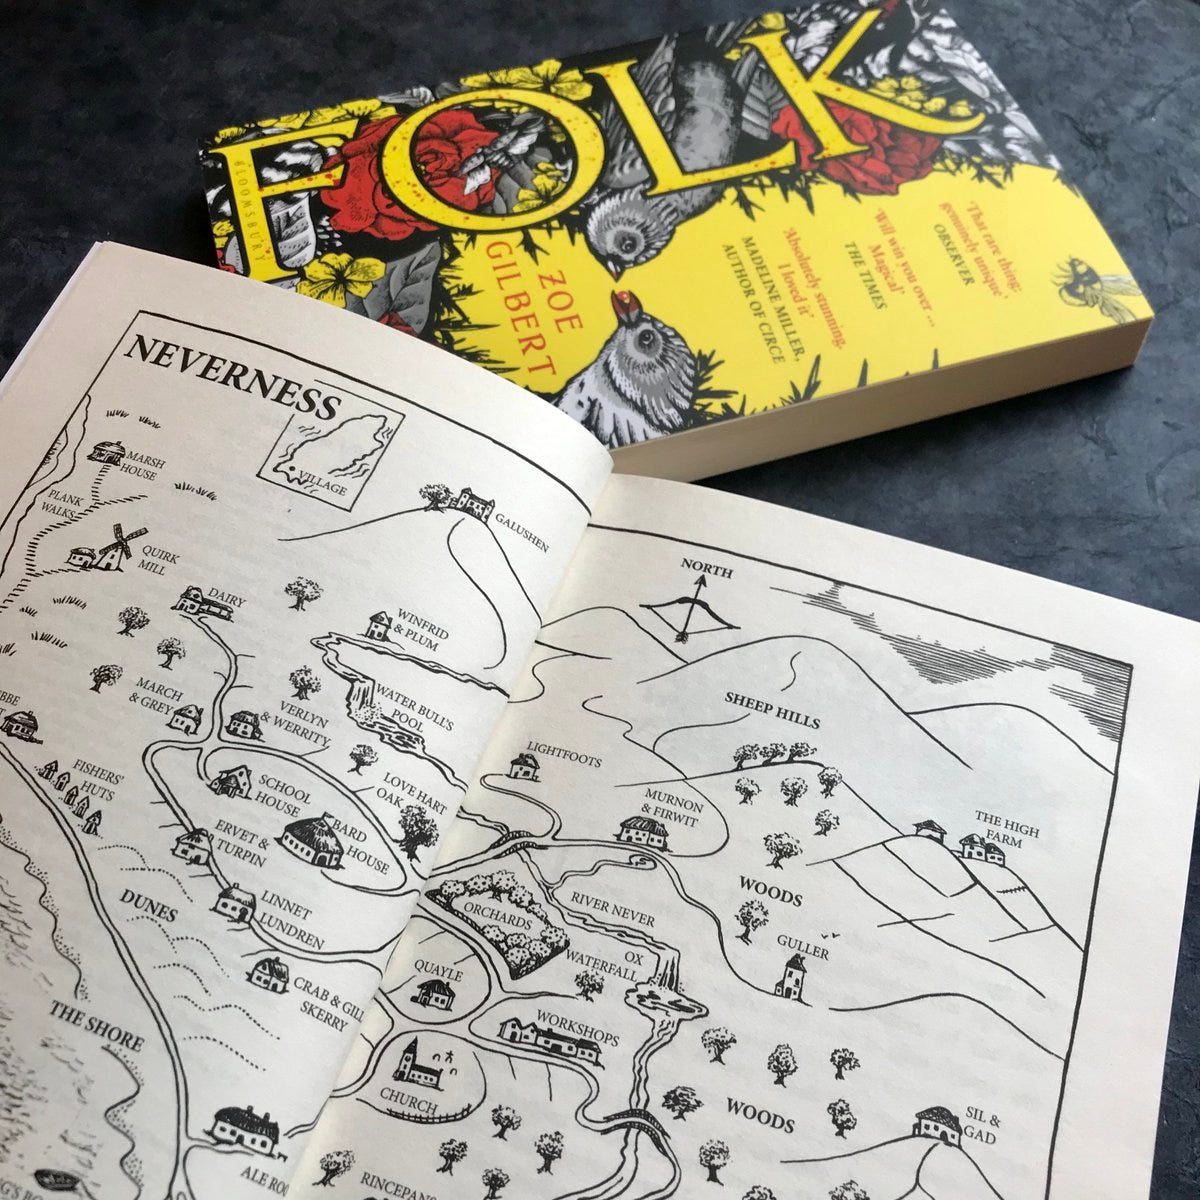 Bloomsbury Books UK on Twitter: "🗺️ Here's the map of the remote island of  Neverness from @mindandlanguage's hauntingly beautiful FOLK  https://t.co/uIkVdwZO6F" / Twitter